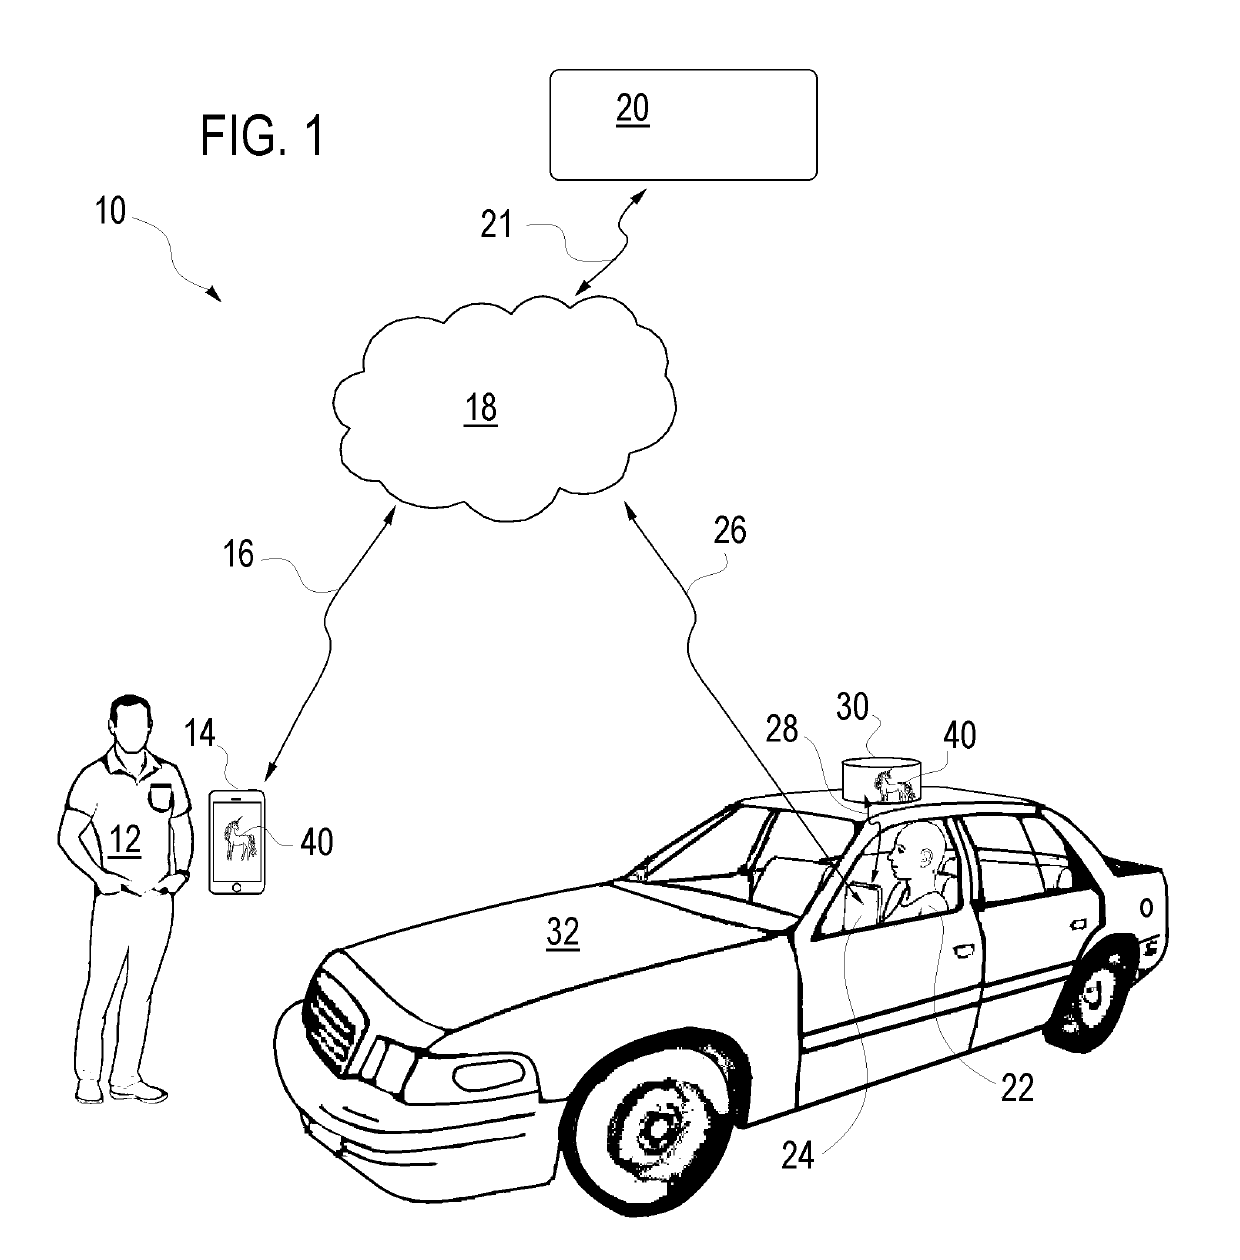 Enhanced vehicle authentication system platform providing real time visual based unique taxi vehicle authentication for customers and drivers and methods of implementing the same